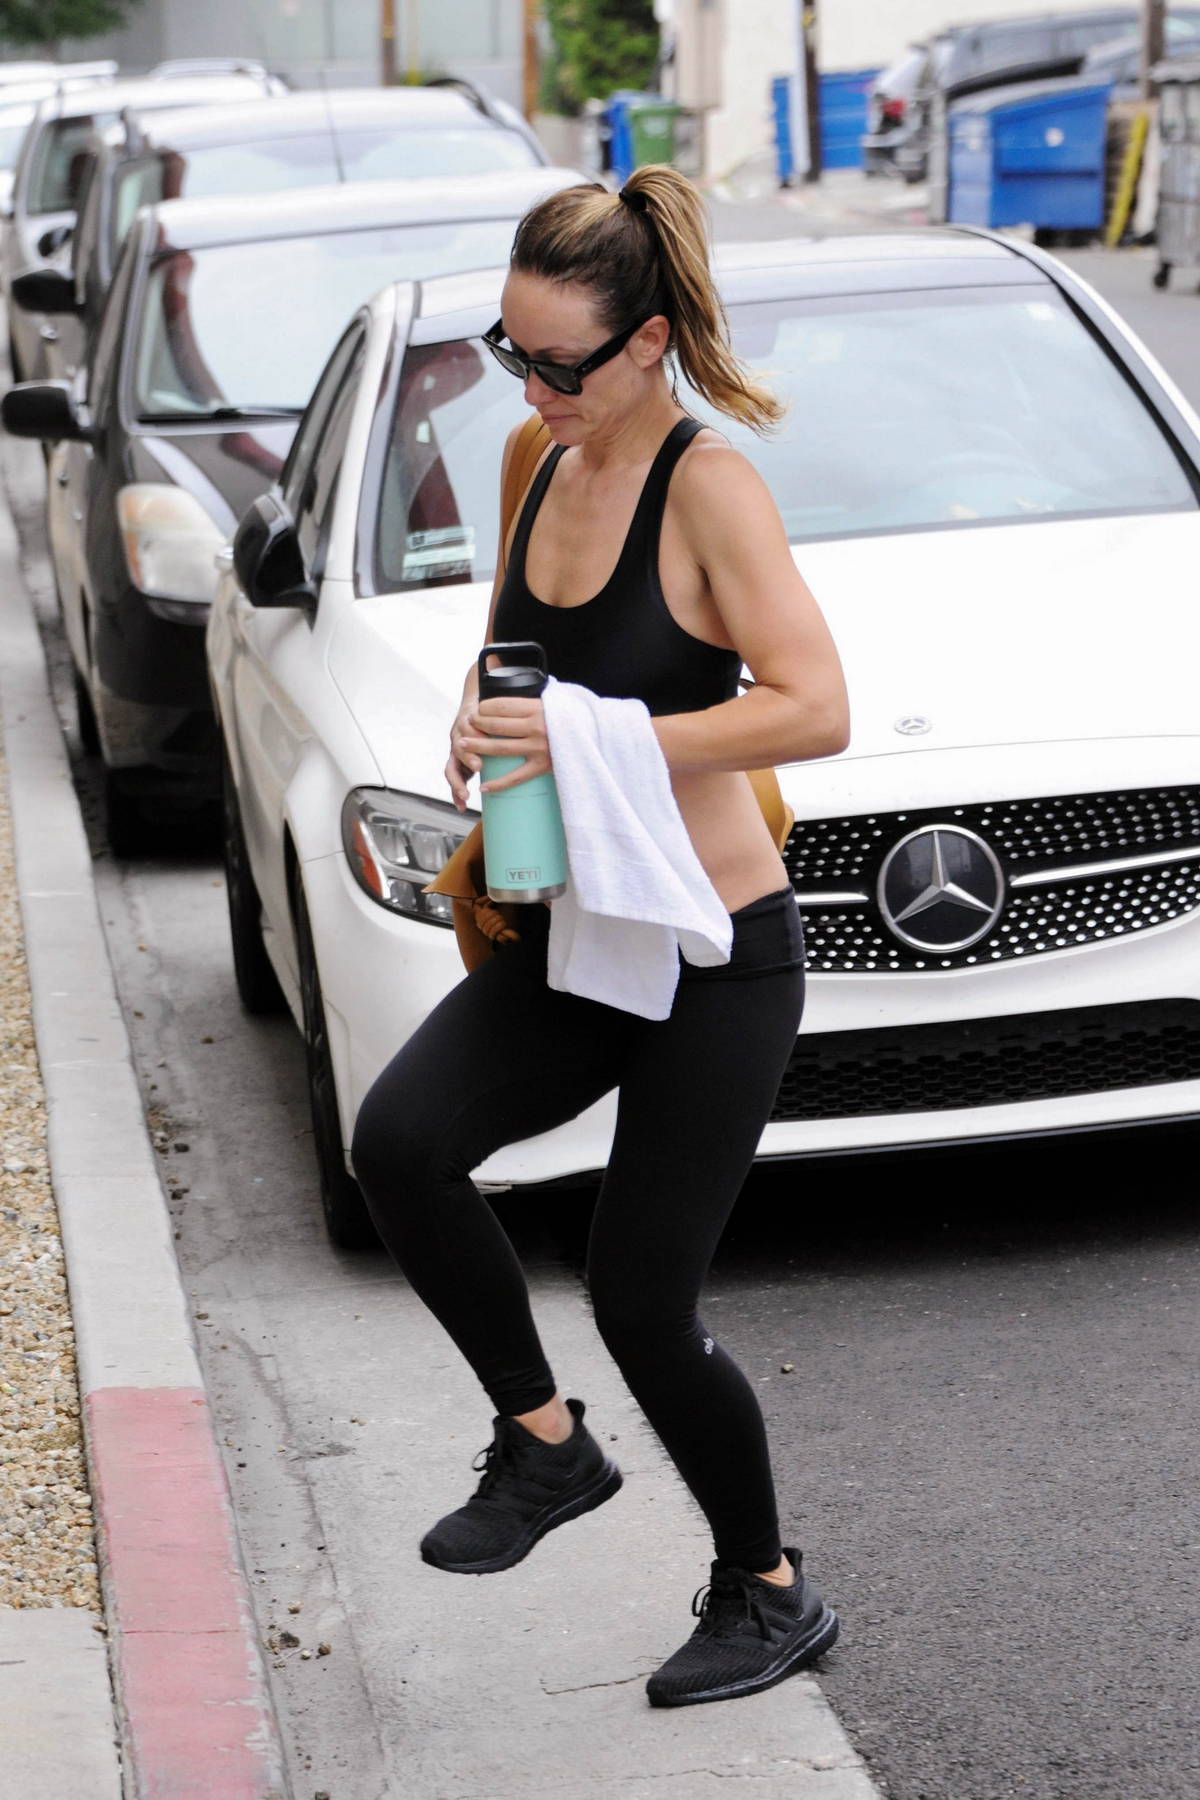 Olivia Wilde shows off her killer abs in a black tank top and